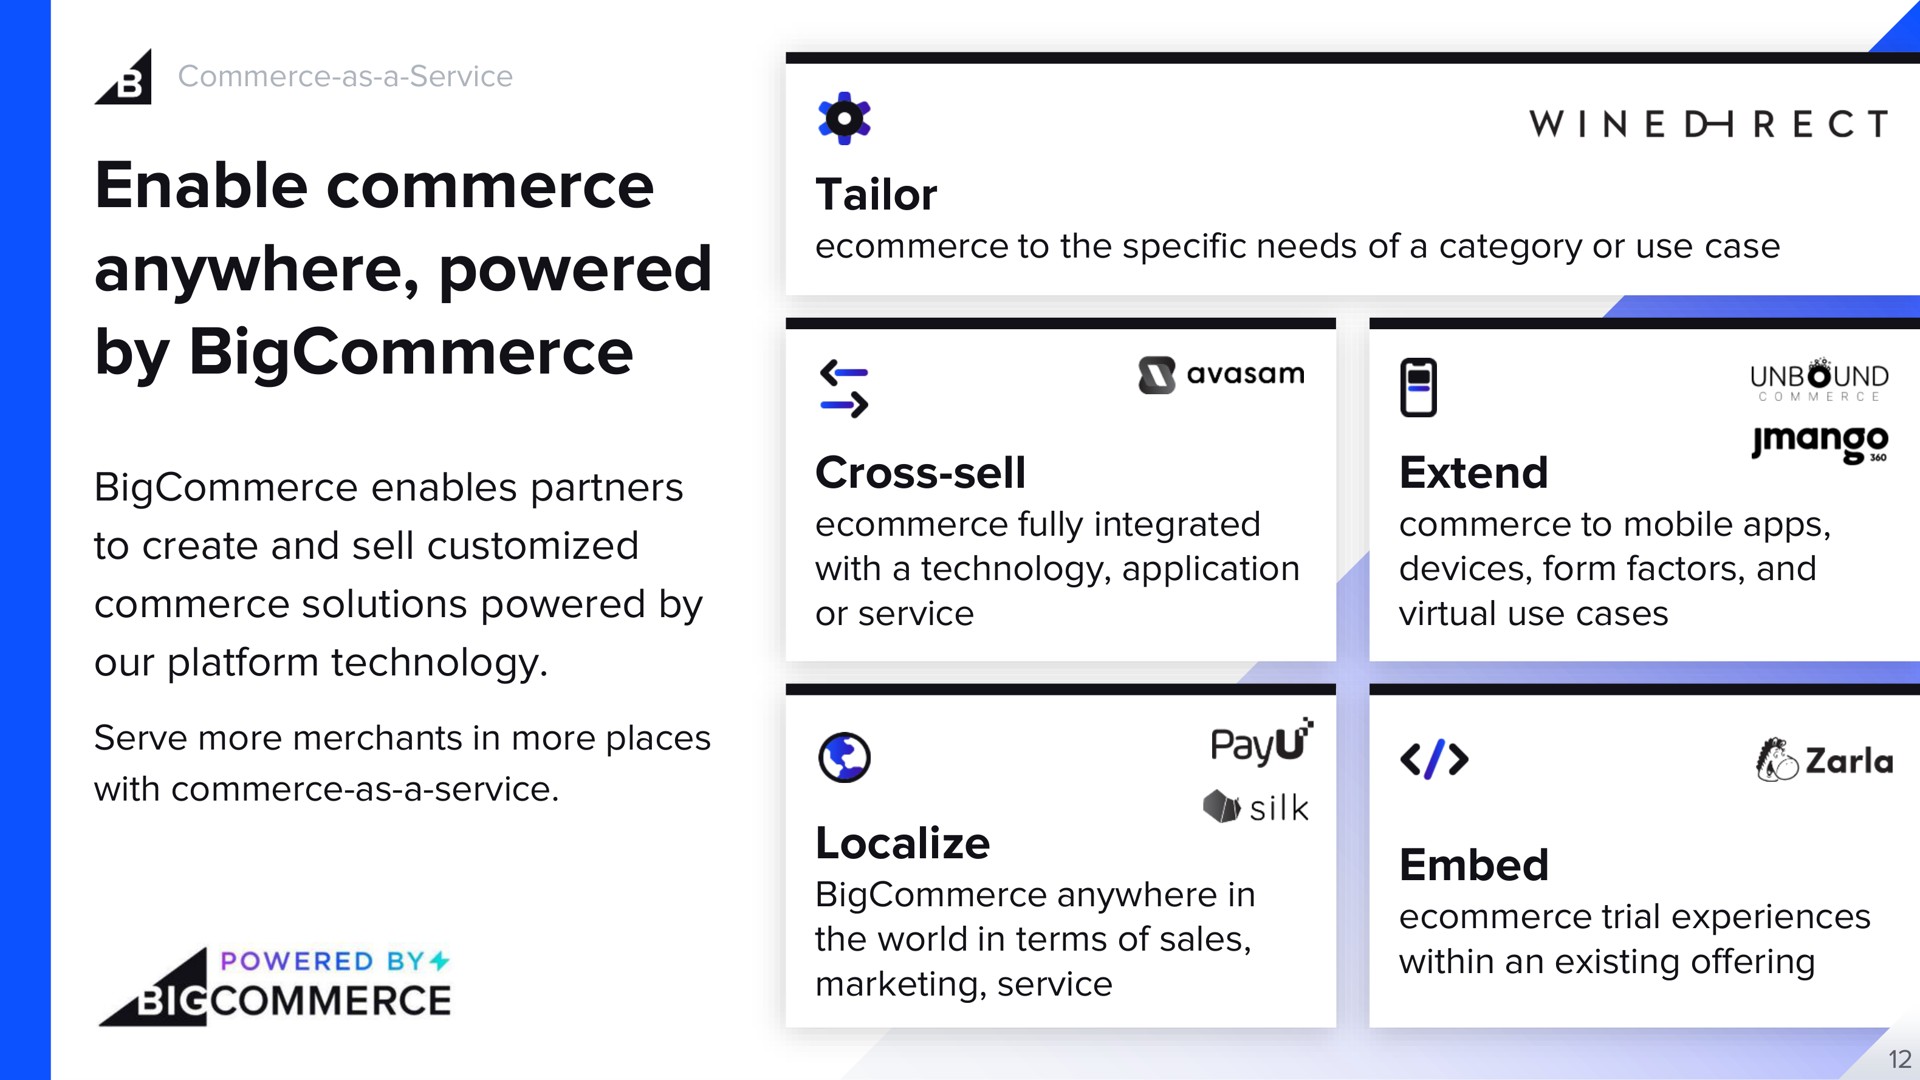 enable commerce anywhere powered by enables partners to create and sell commerce solutions powered by our platform technology tailor cross sell extend localize embed a wine direct i | BigCommerce